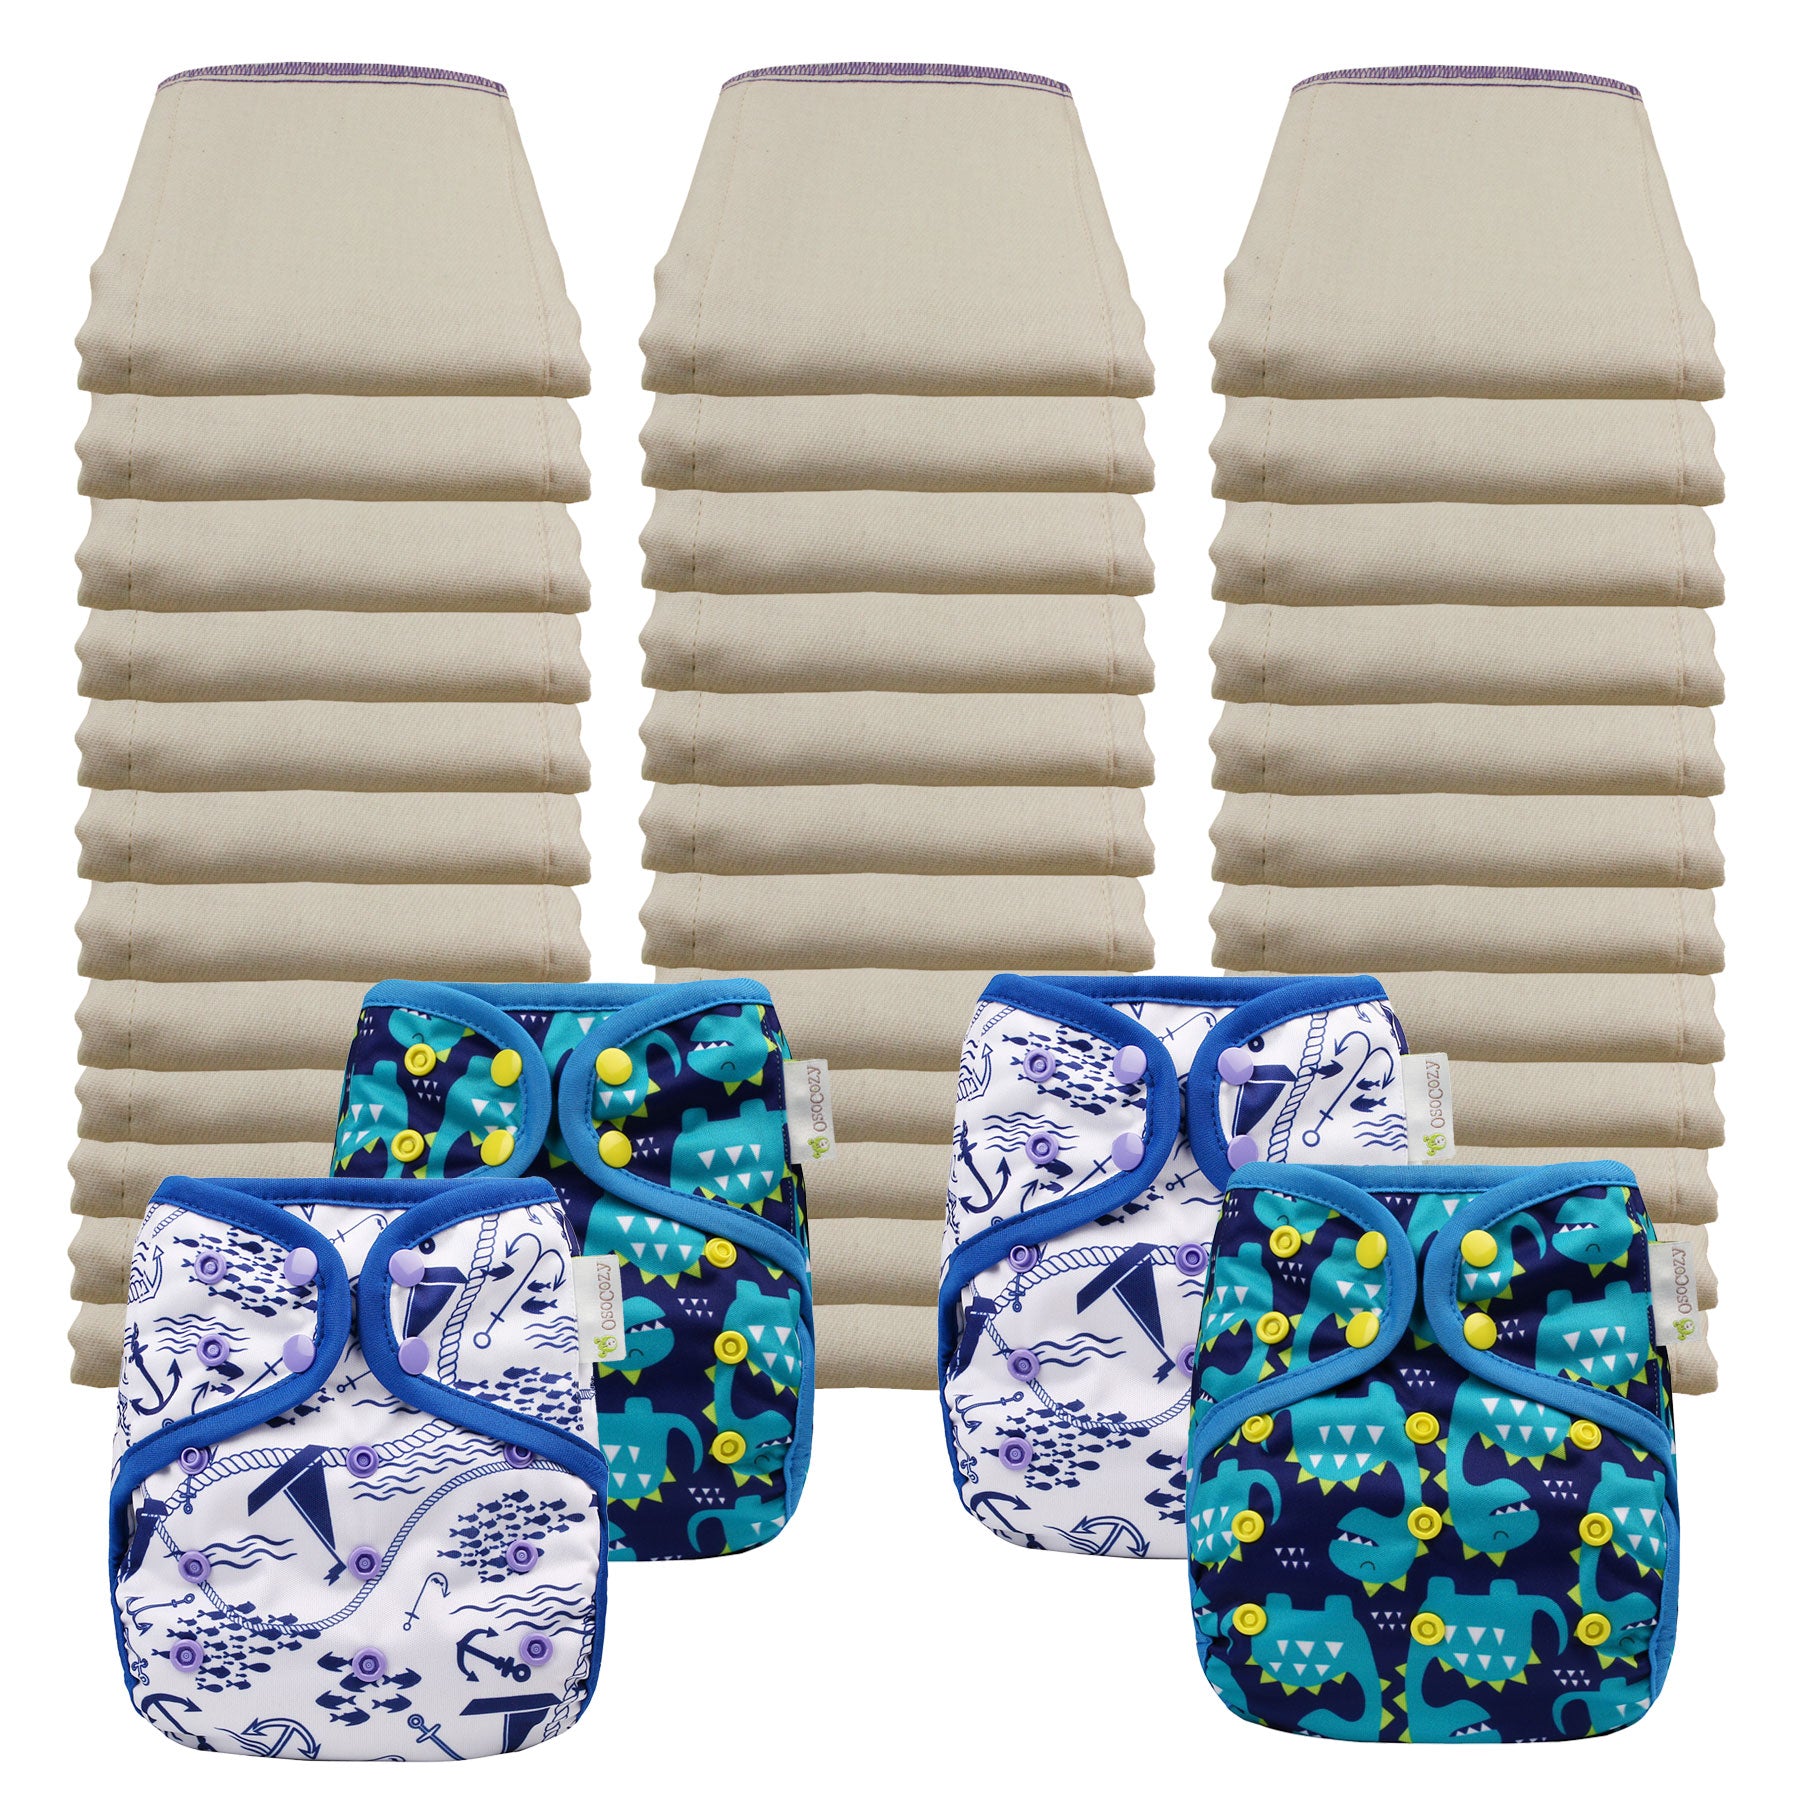 Better Fit Economy Prefold Diaper Packages with OsoCozy One Sized Covers